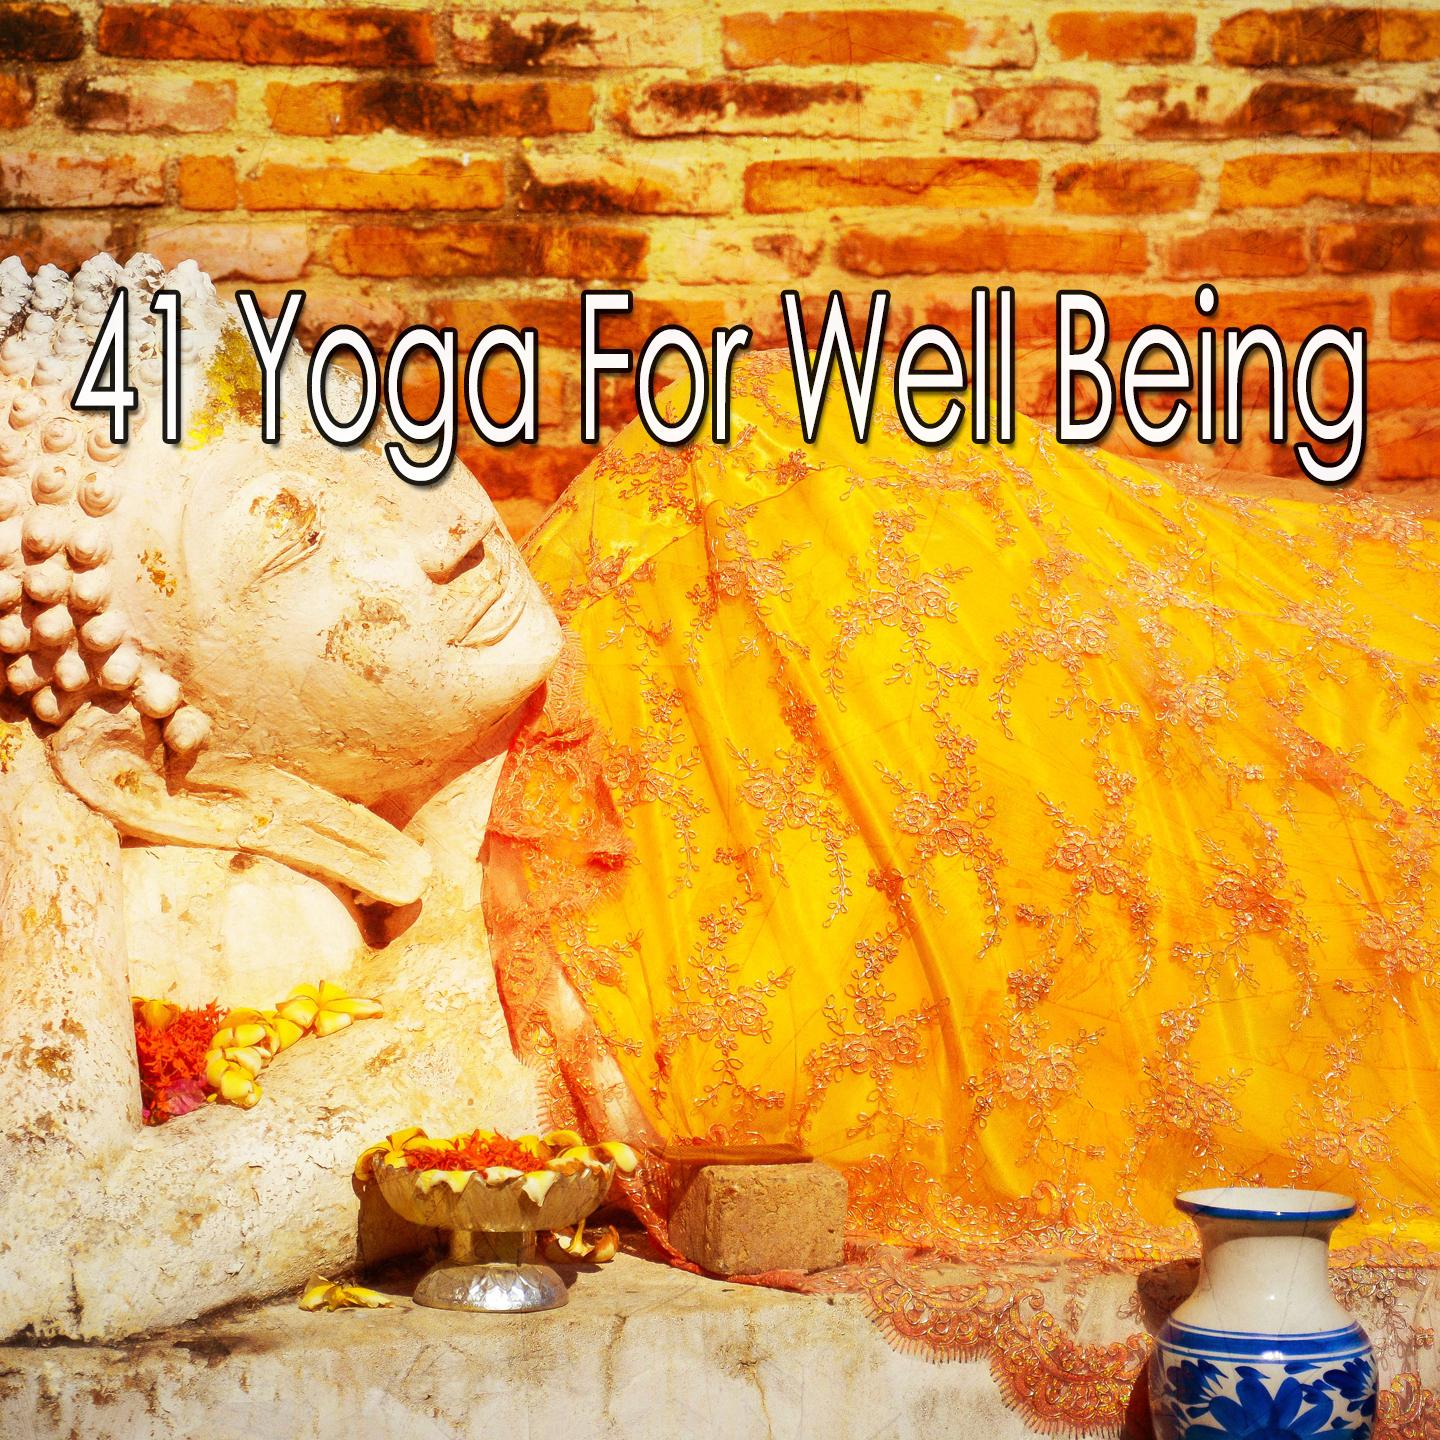 41 Yoga for Well Being